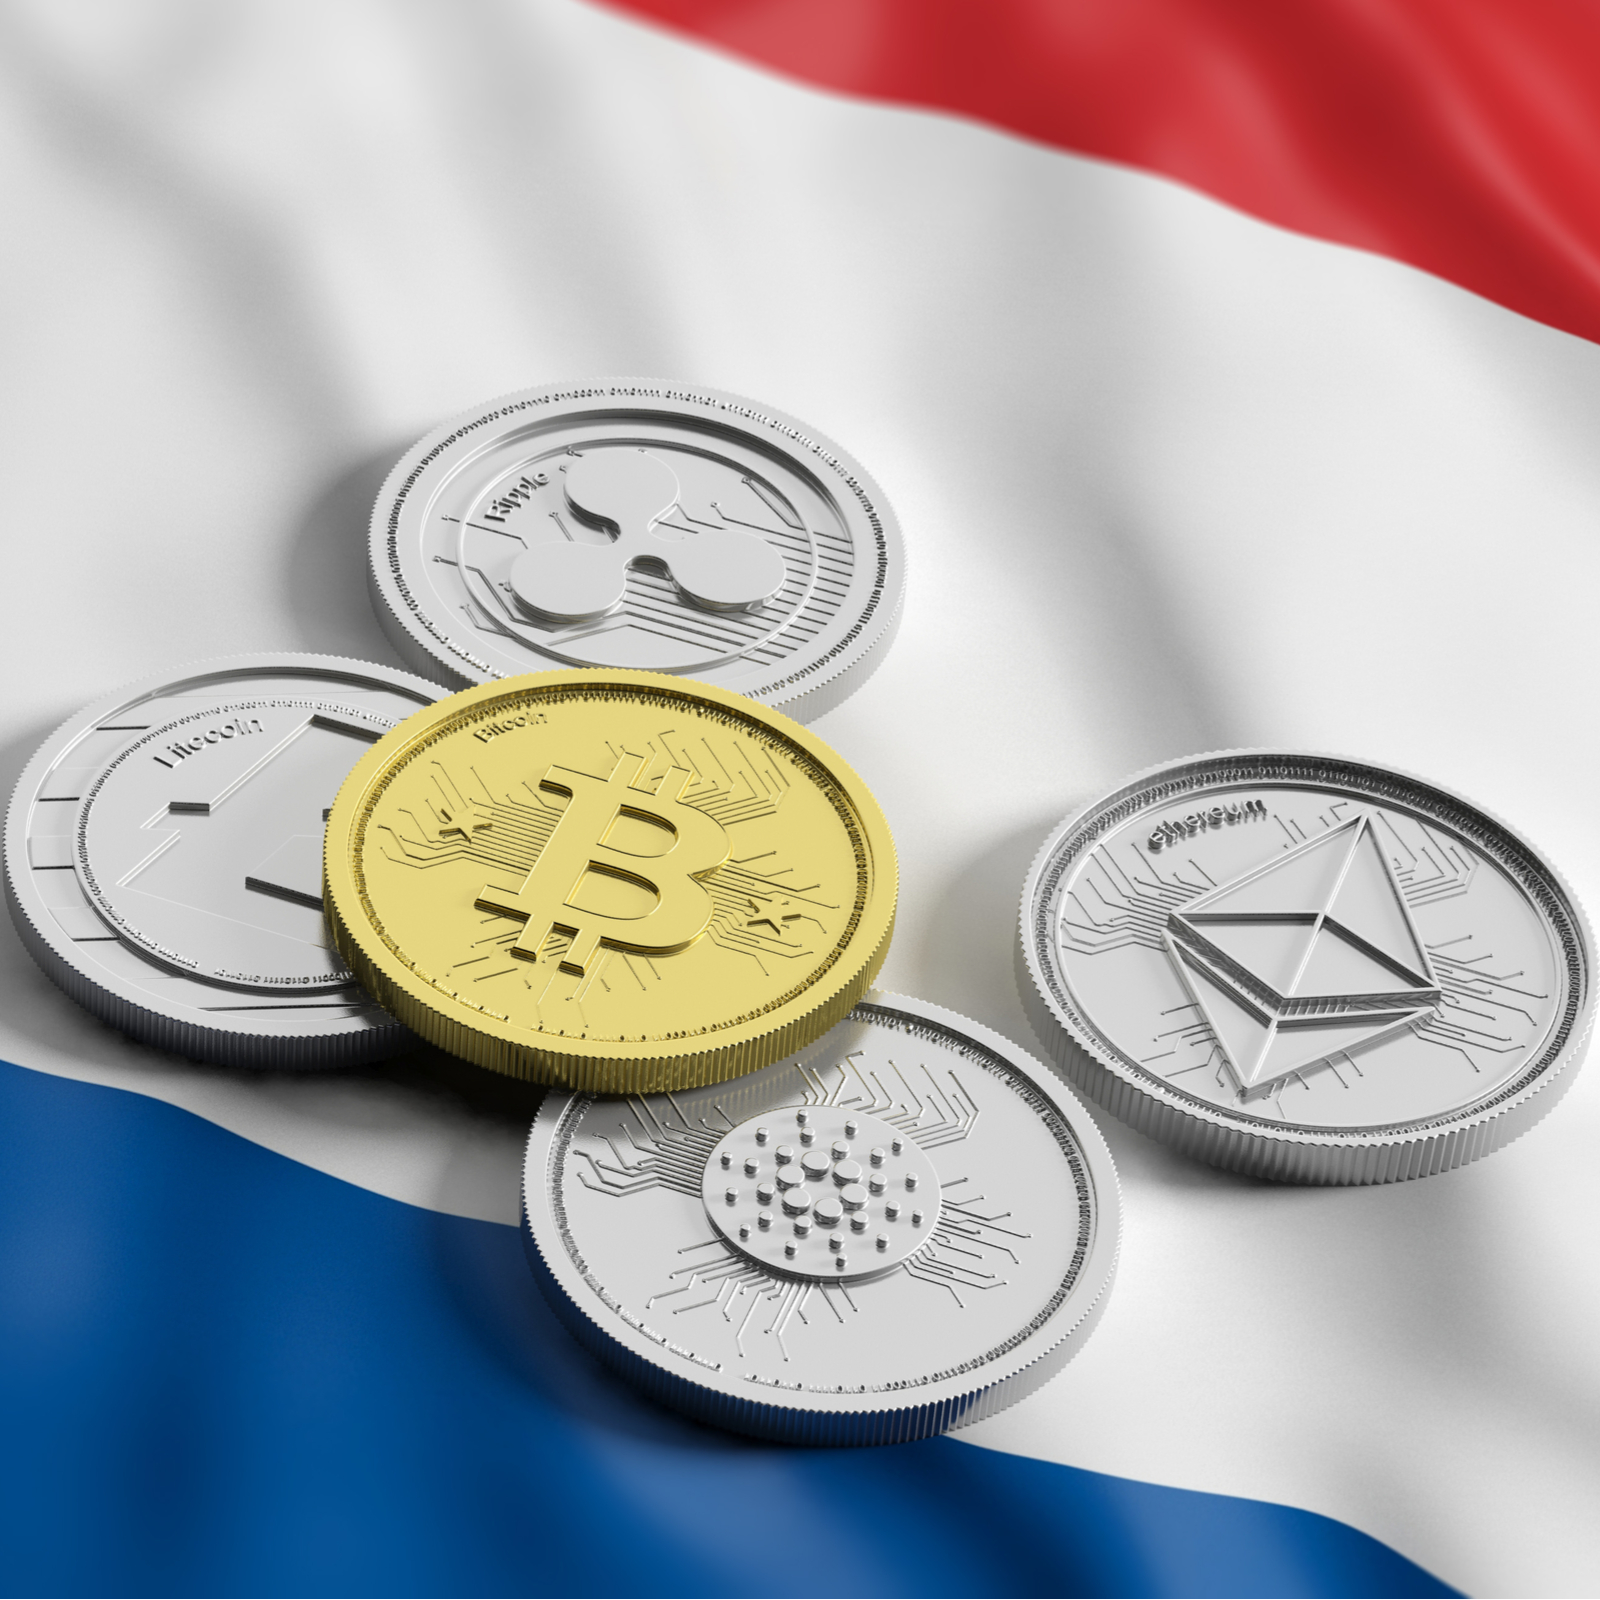 Dutch AFM on Licensing Requirements for Institutions Invested in Crypto